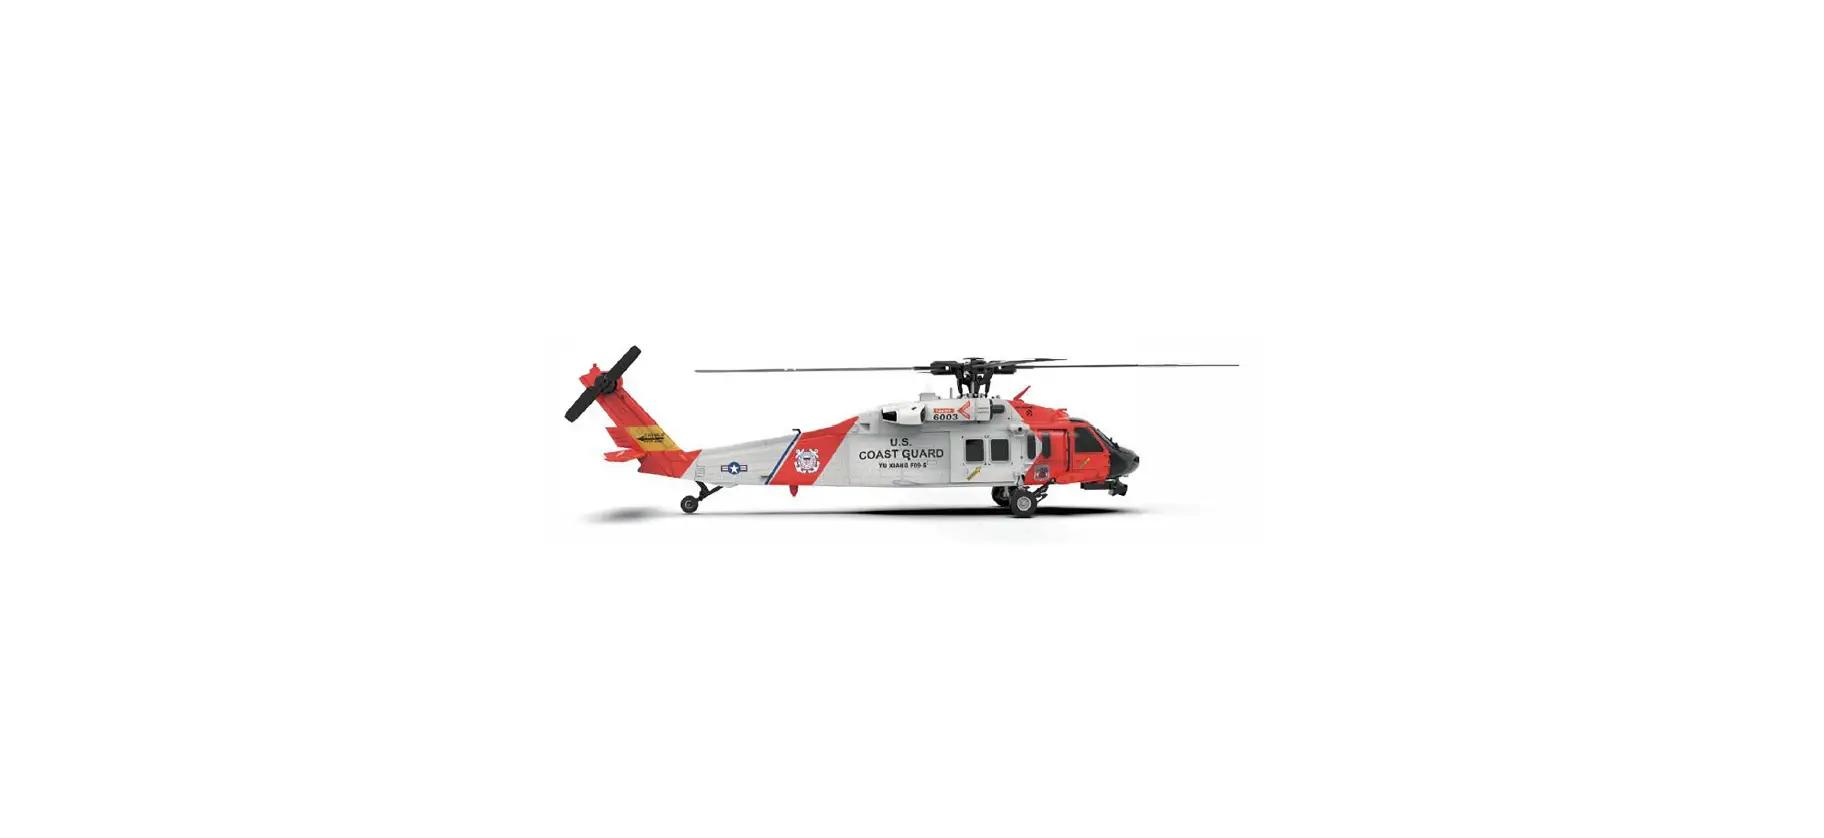 F09 S Rc Helicopter: Section for this article:Impressive Technical Specifications.